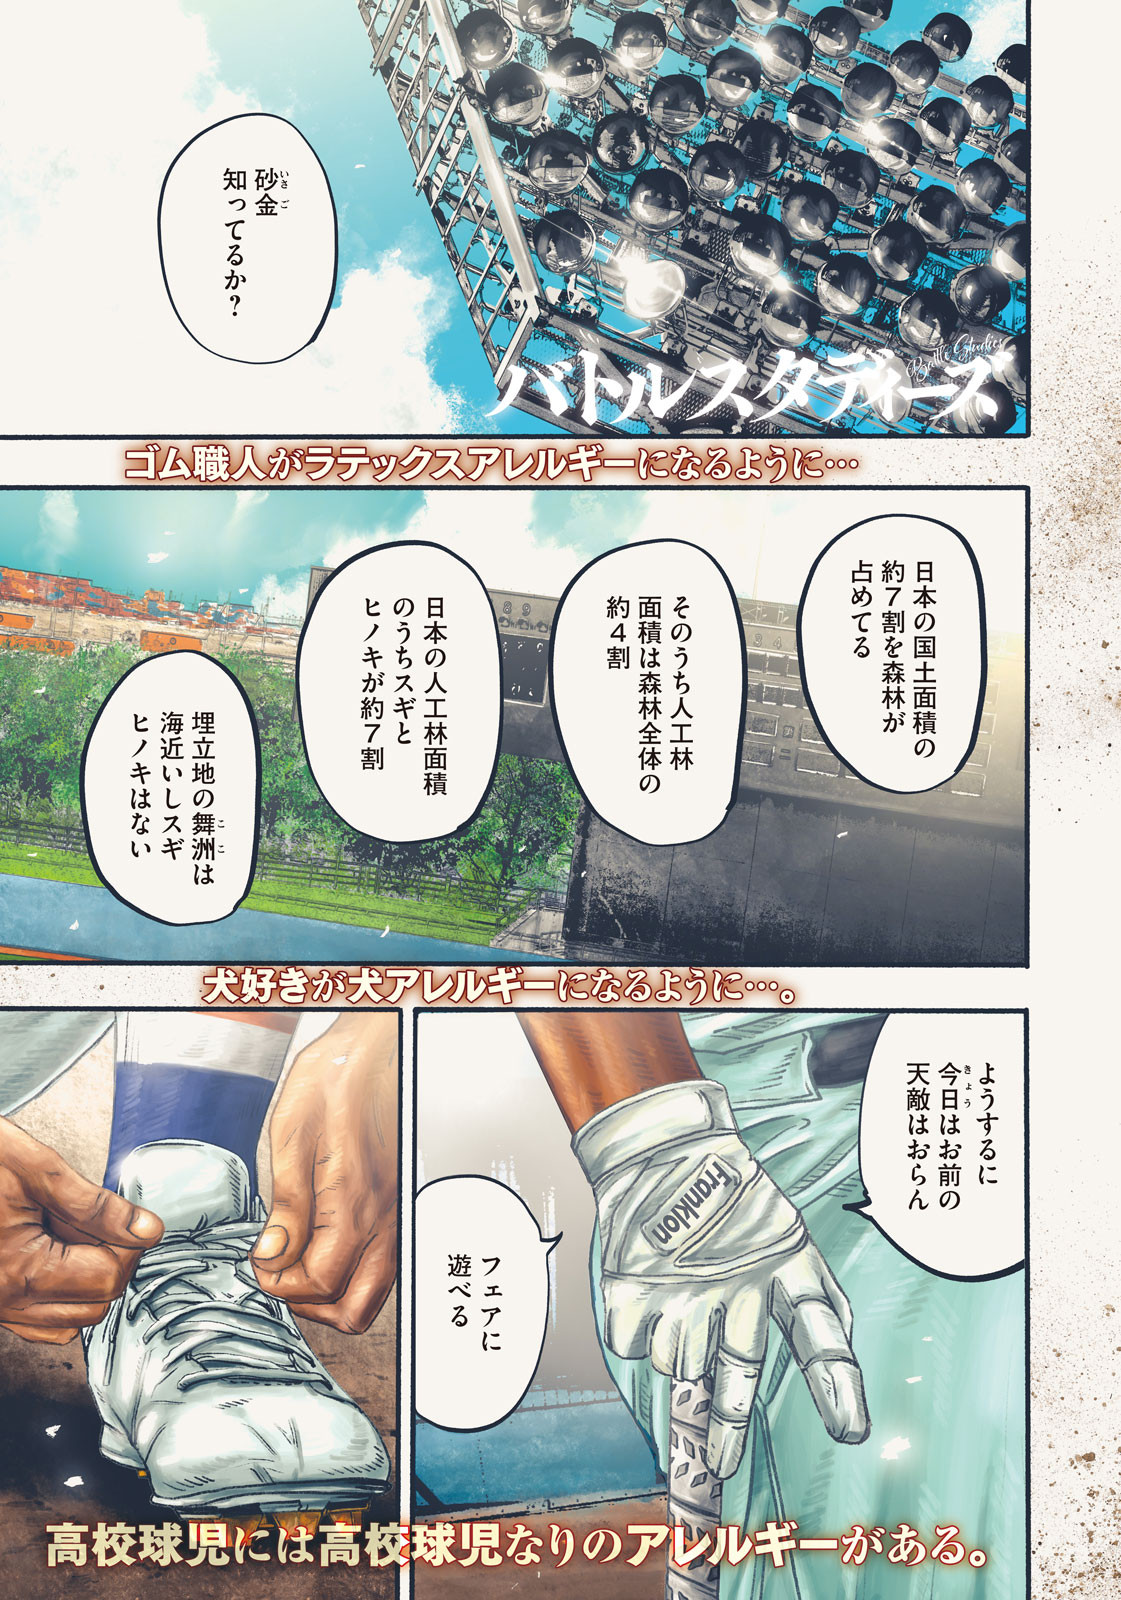 Weekly Morning - 週刊モーニング - Chapter 2023-39 - Page 3